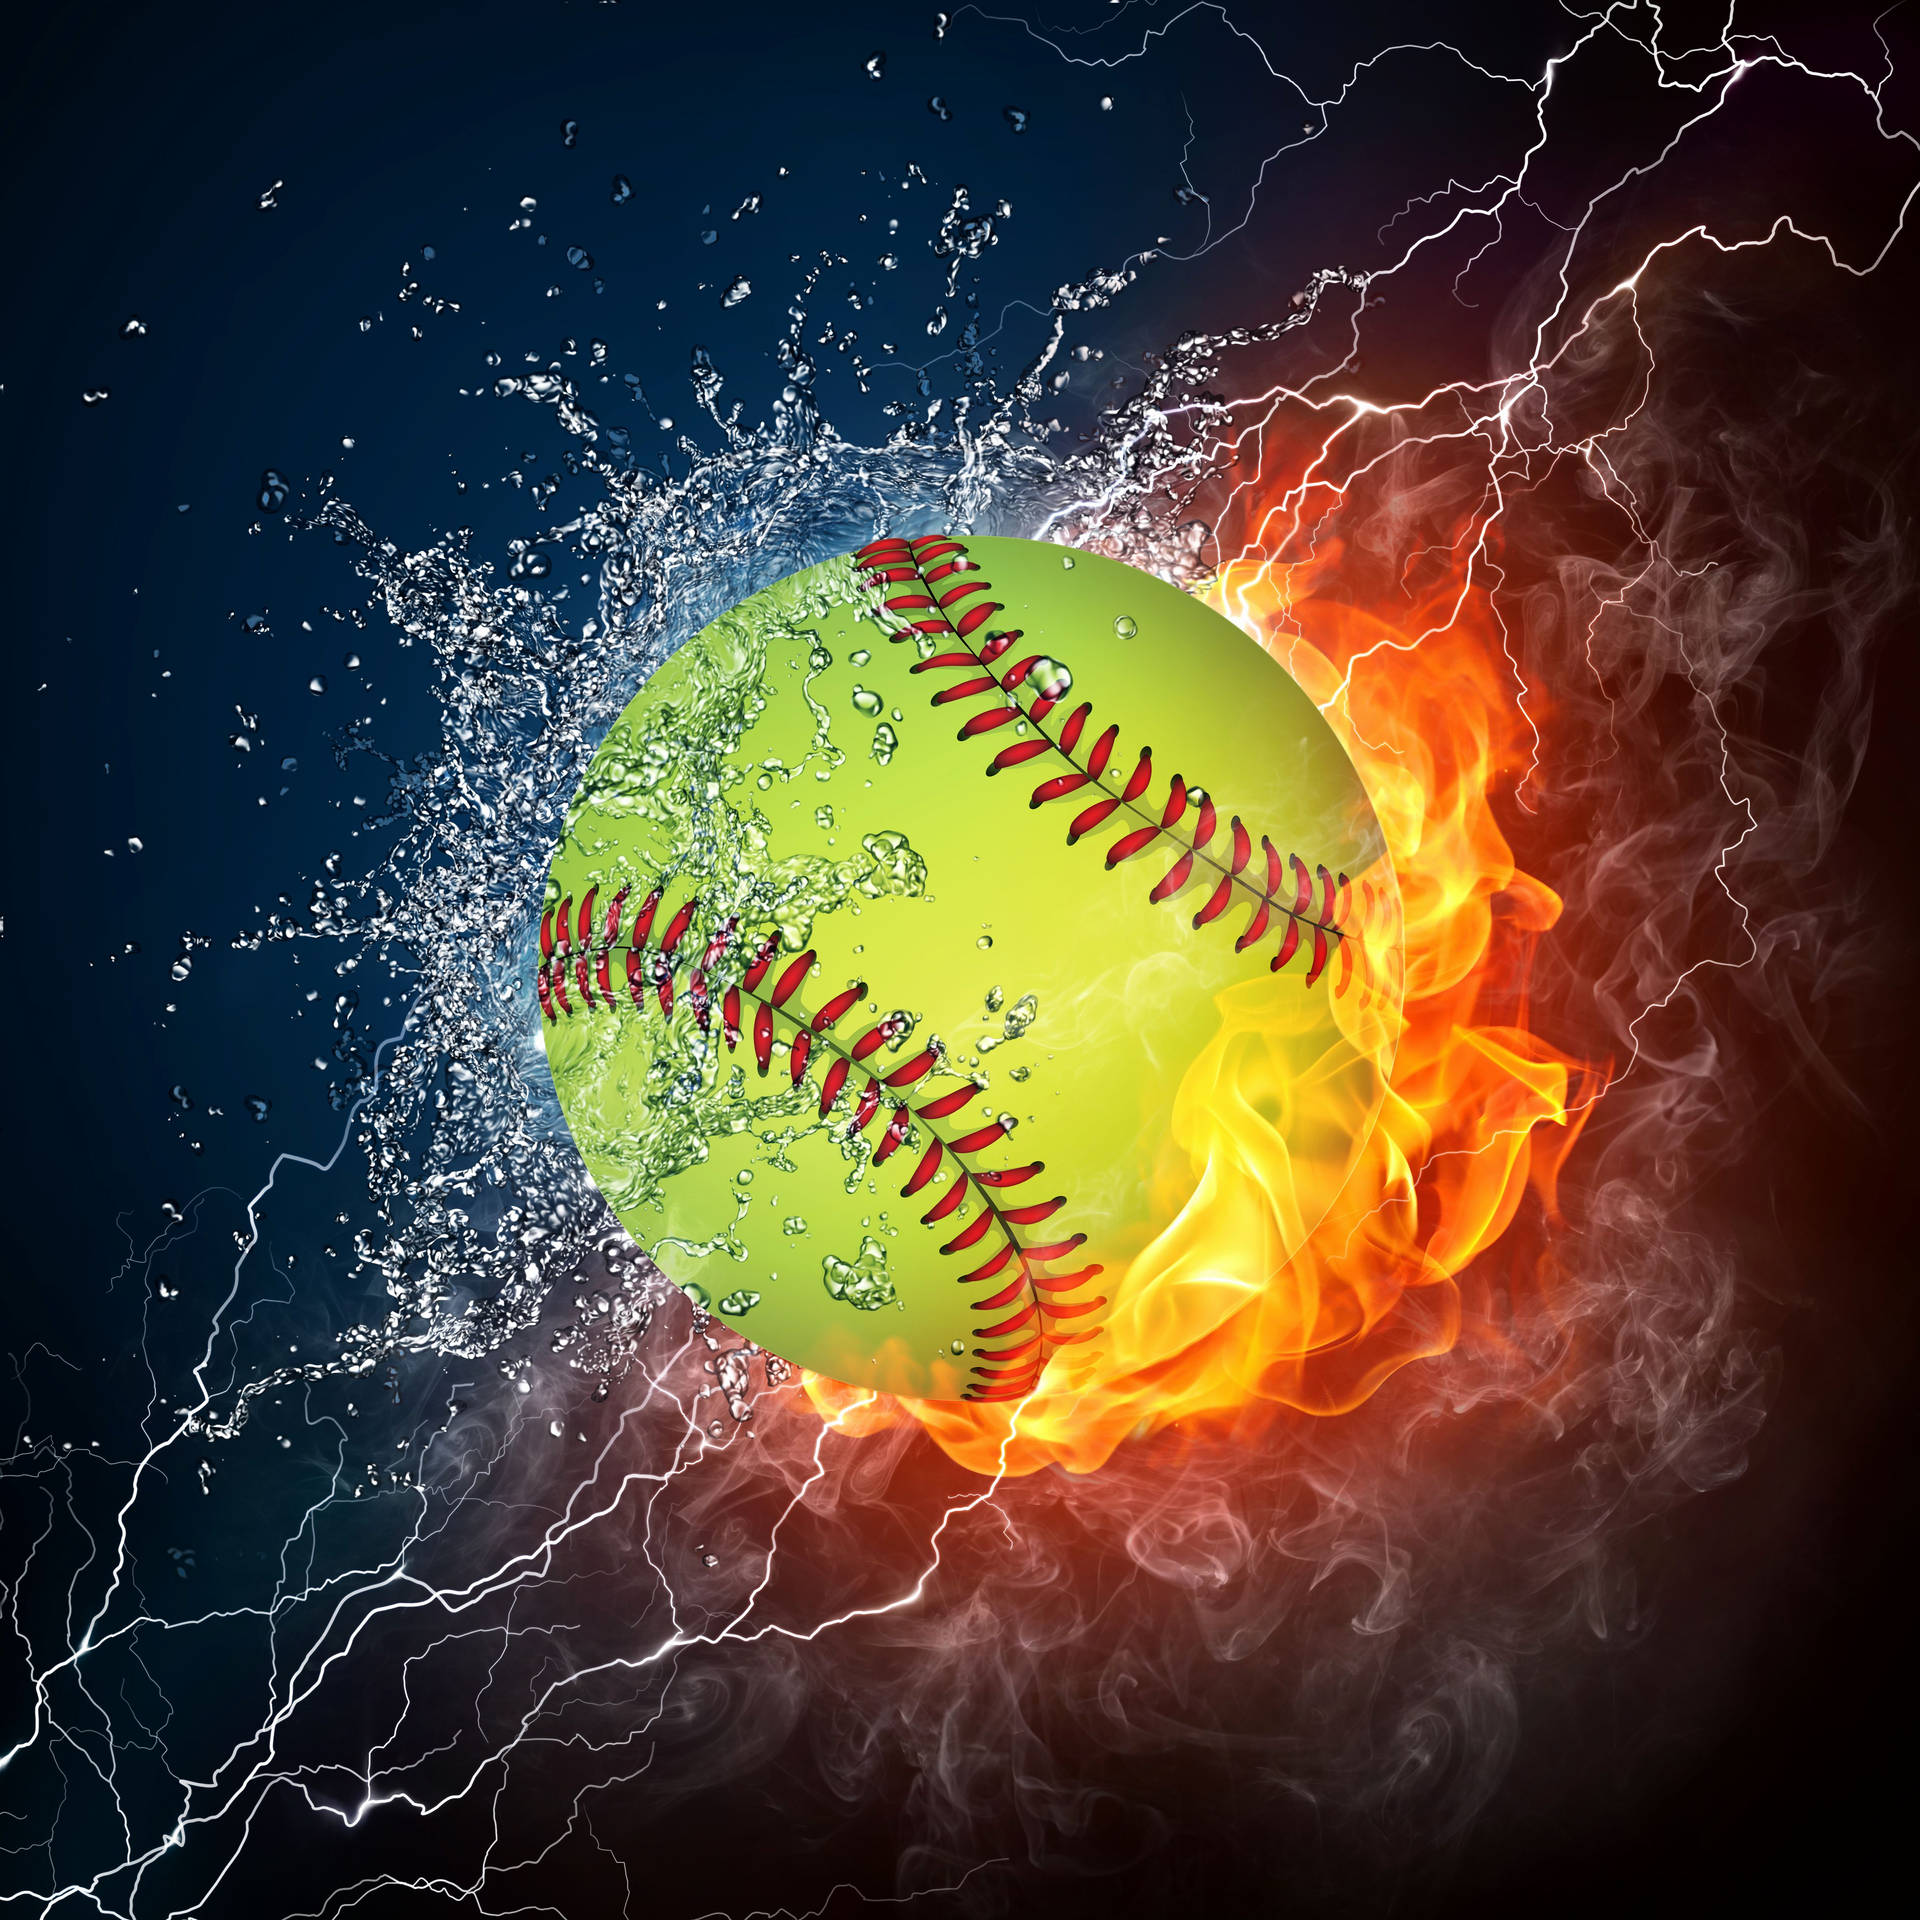 Fire And Water Awesome Softball Wallpaper